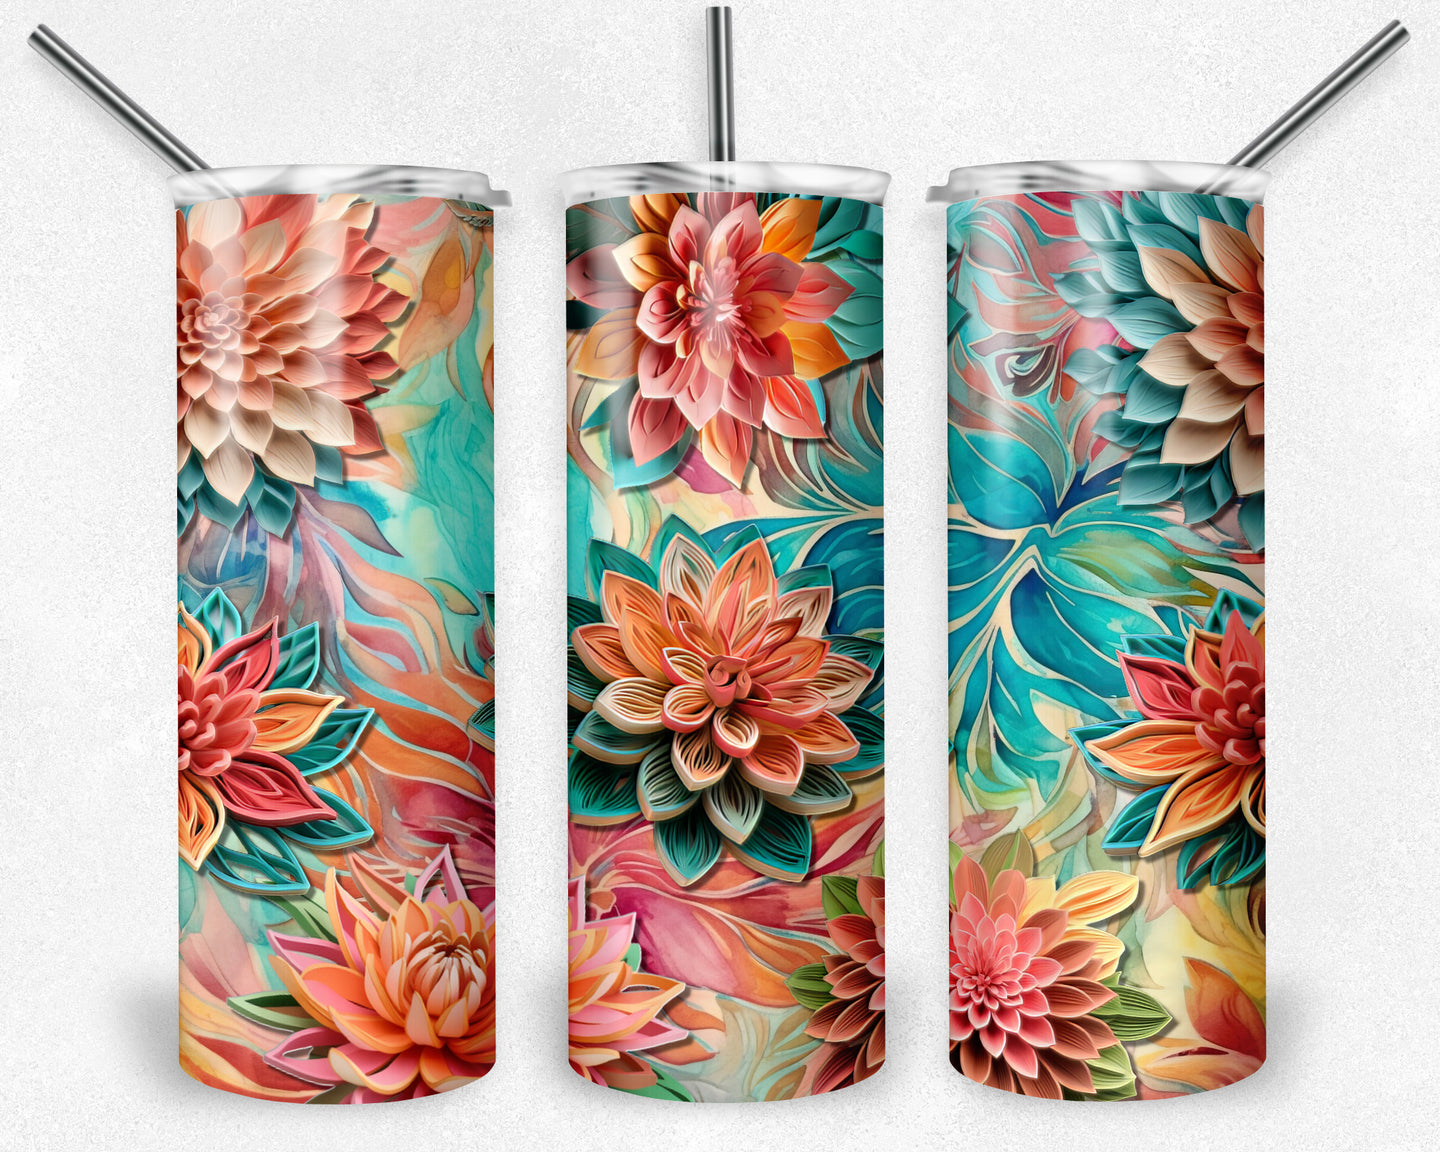 Flowers in Pink, Orange, and Teal